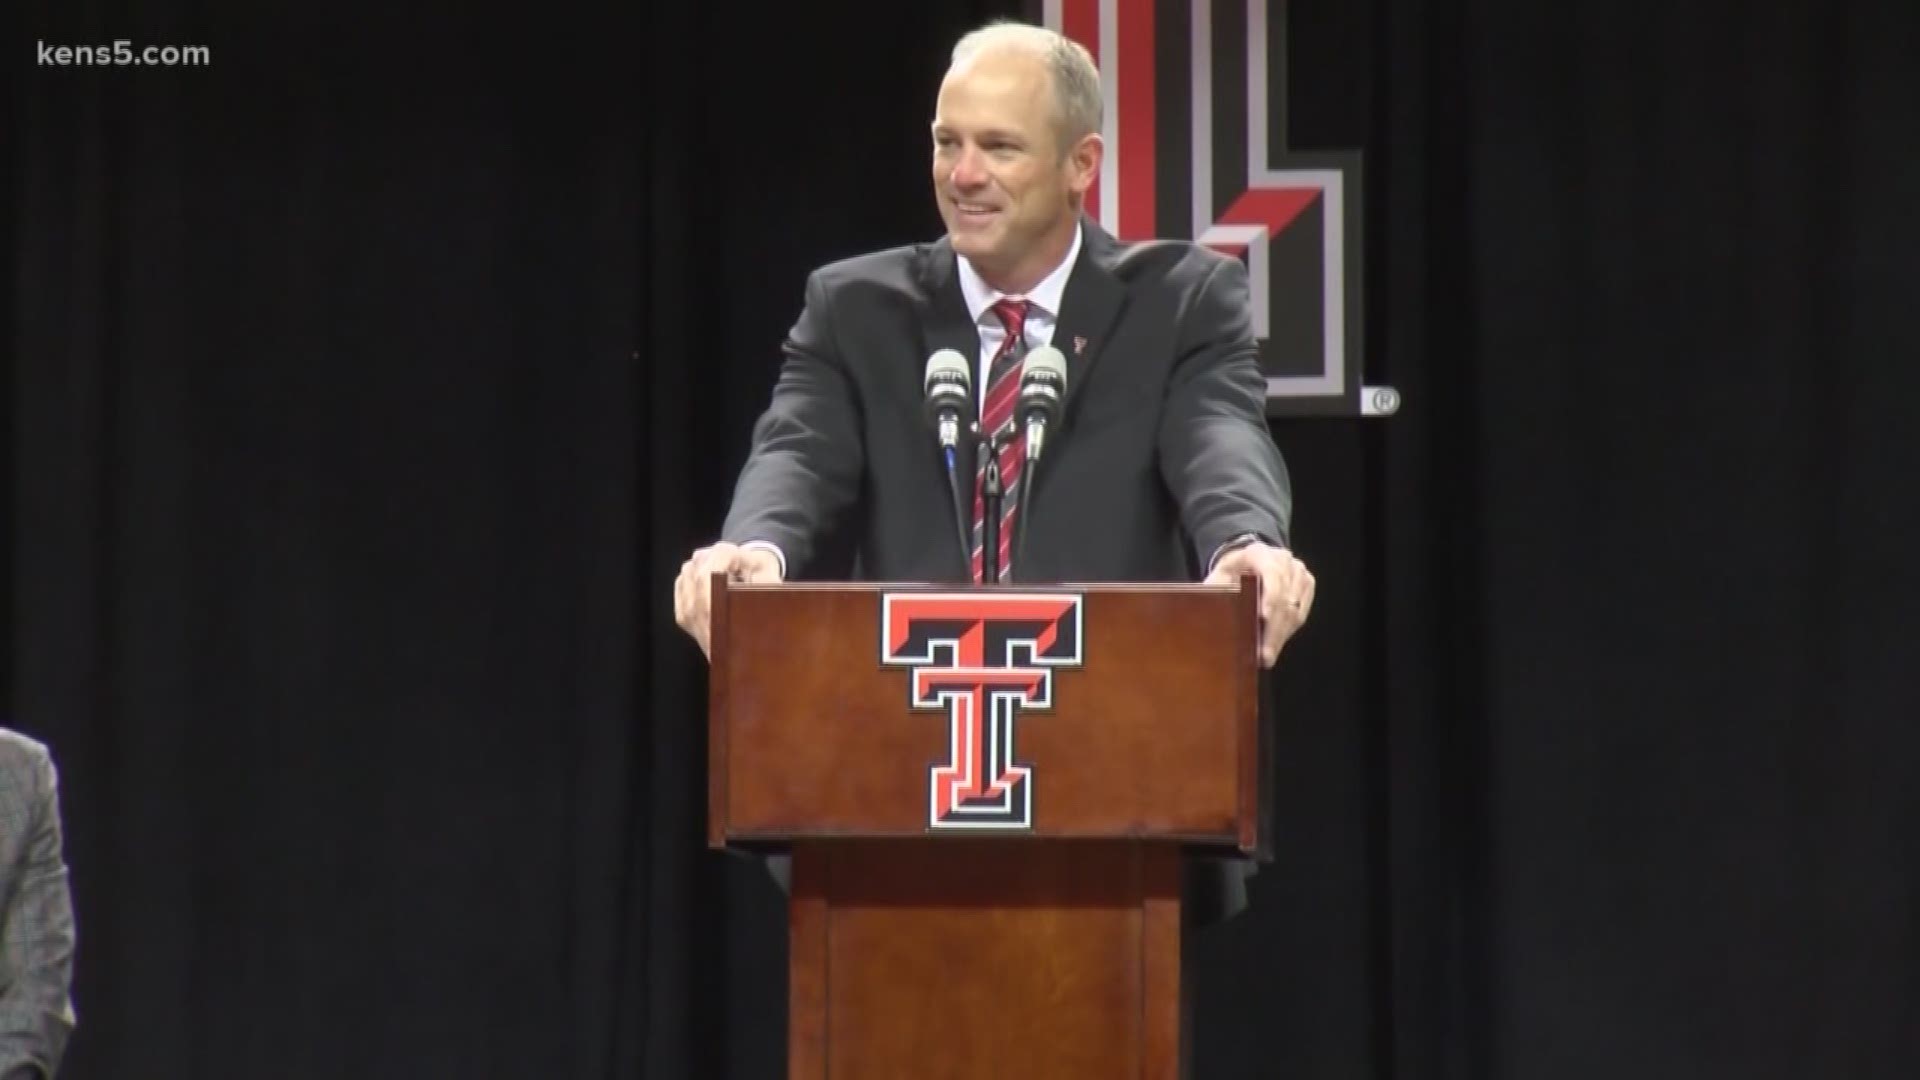 The Texas Tech football program has a new face. Gone is Kliff Kingsbury, one of the most popular figures in program history. In is Matt Wells, who was in town today as part of a Texas tour. Vinnie Vinzetta spoke with him one on one.